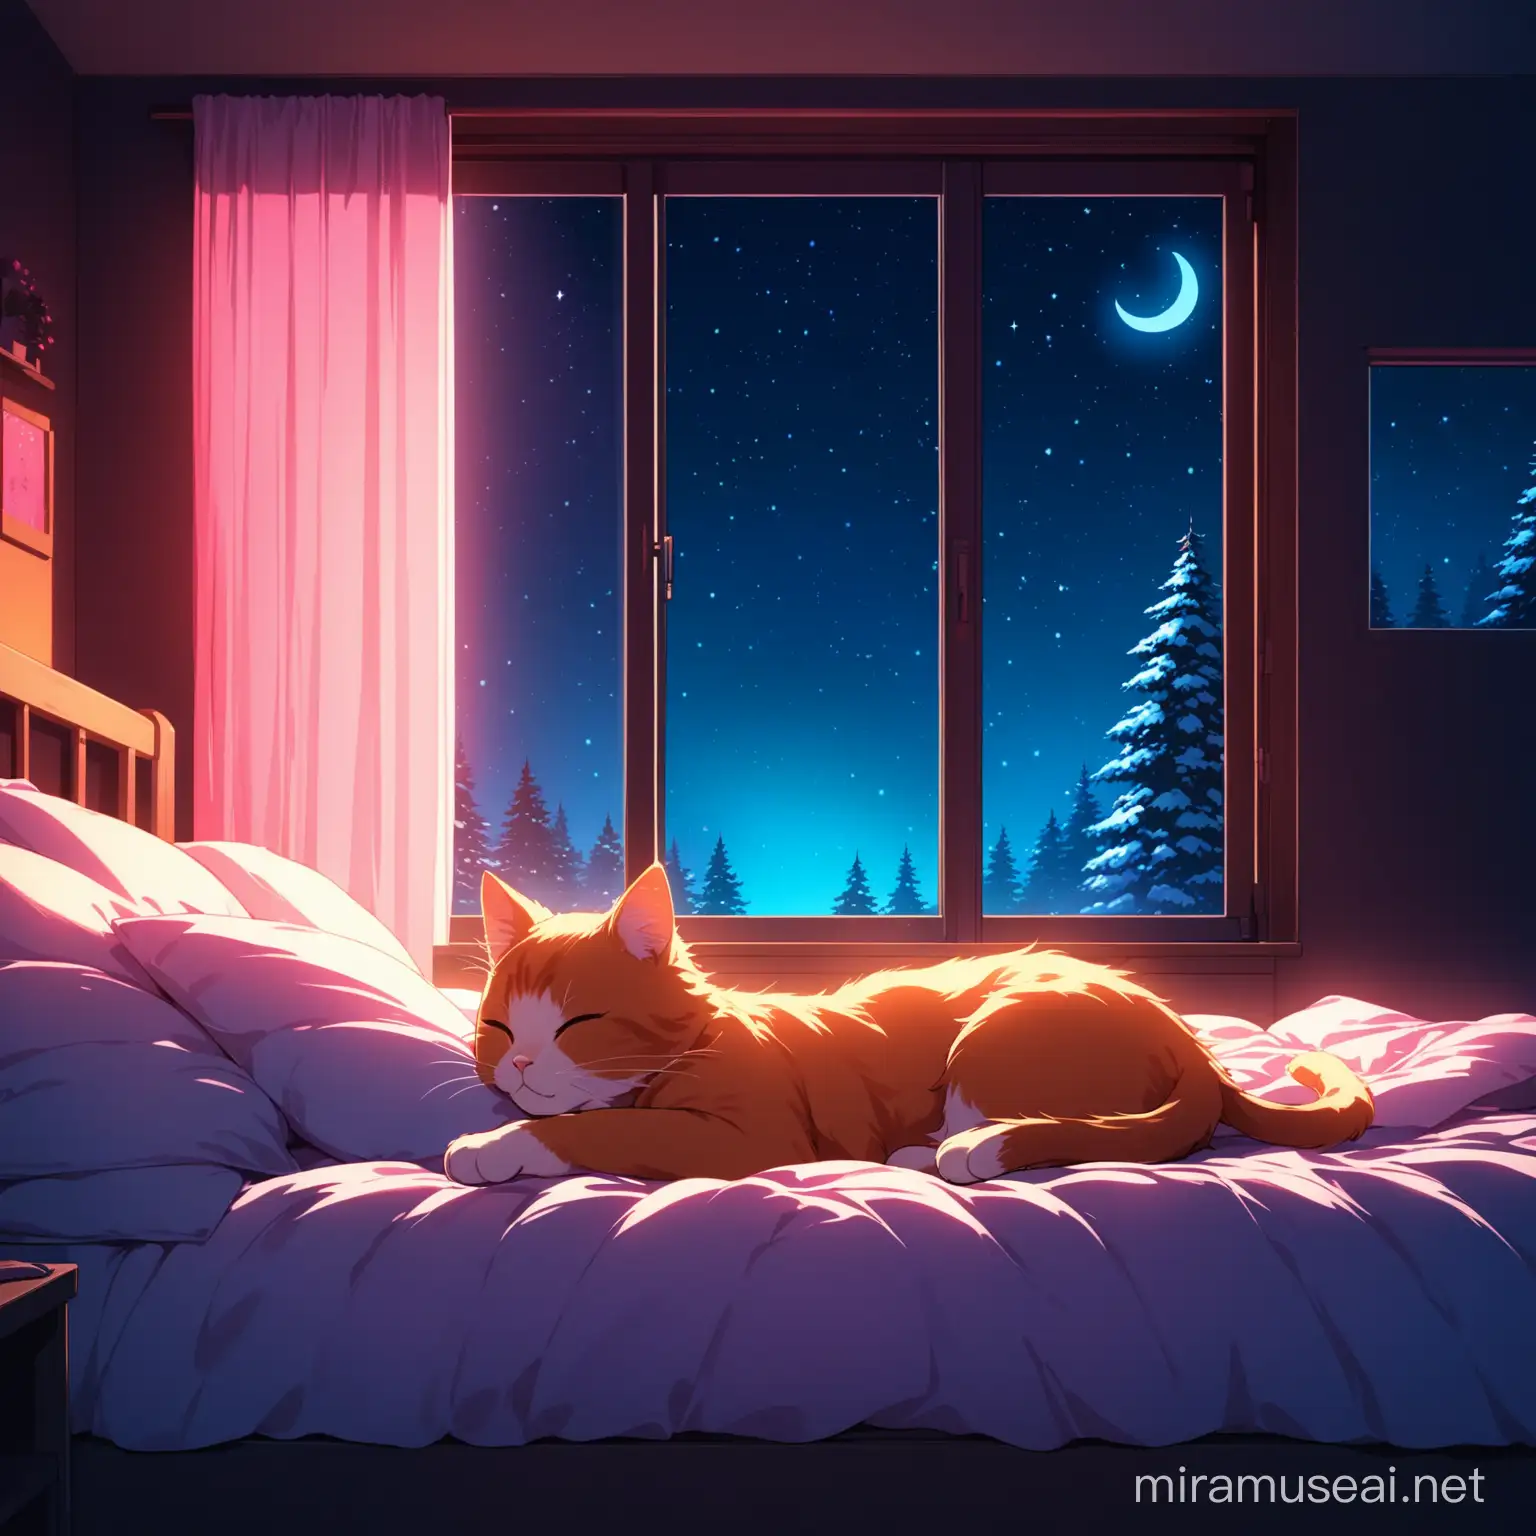 8k,a big Warm room, bed next to the window, dark night outside, beautiful girl sleeping on the bed ,winter, beautiful reassuring light, colorful neon, A little cat sleeping next to the shamnia